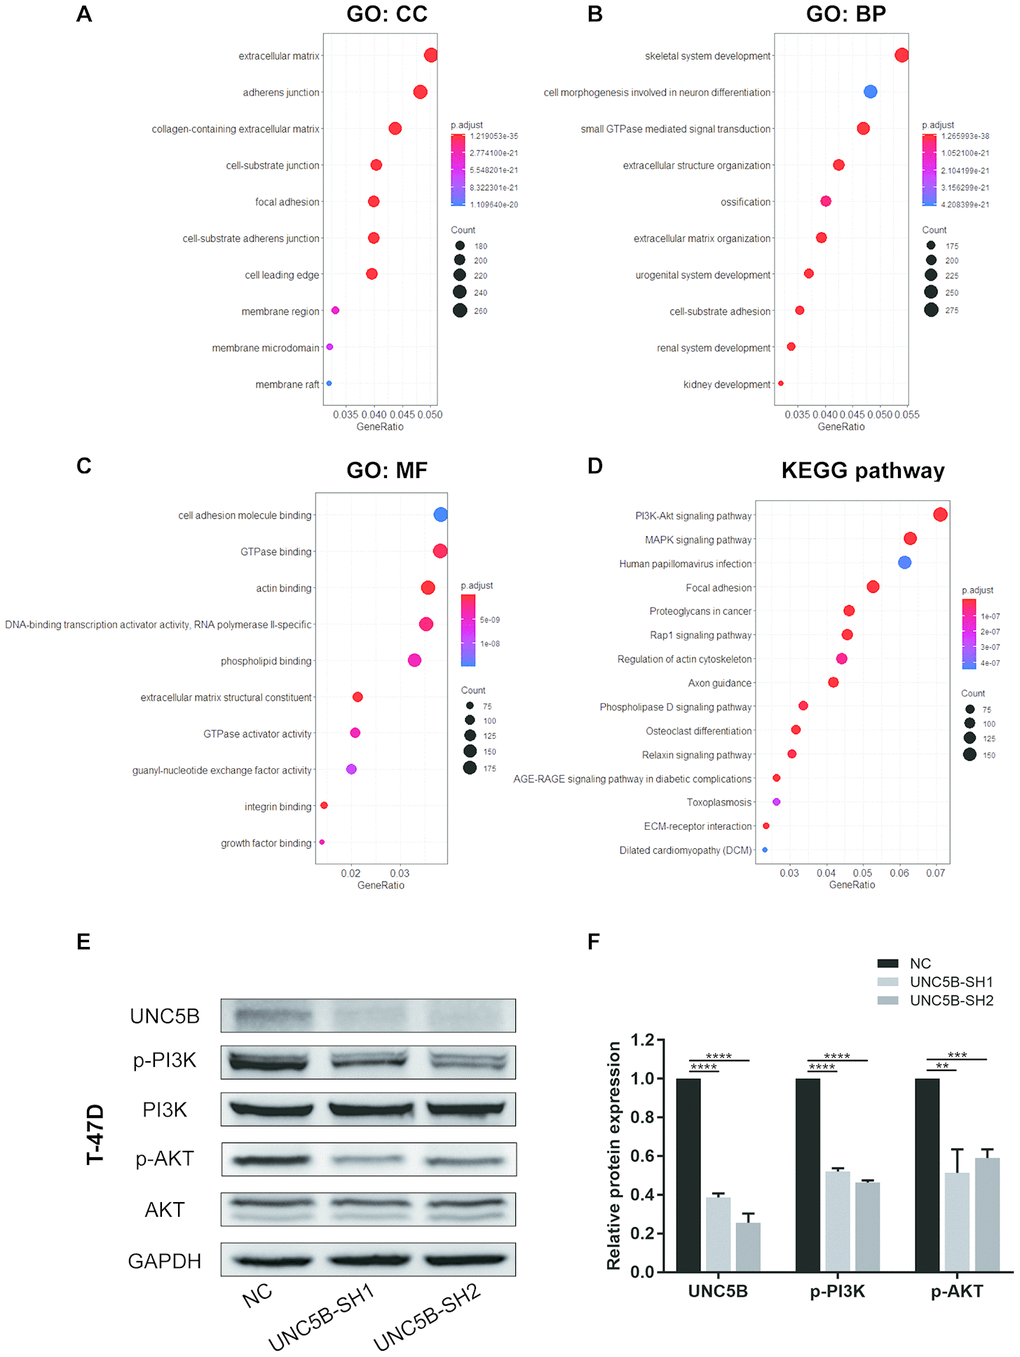 UNC5B knockdown compromised PI3K/Akt signaling activation in breast cancer cells. (A–D) The functions of UNC5B and genes significantly co-expressed with UNC5B were predicted in GO and KEGG pathway enrichment analyses using the “clusterProfiler” package in R. (A) Cellular components. (B) Biological processes. (C) Molecular functions. (D) KEGG pathway enrichment analysis. (E, F) Western blot analysis of PI3K and Akt phosphorylation in breast cancer cells after UNC5B knockdown. Data represent three independent experiments. Data are expressed as mean ± s.e.m. **p 